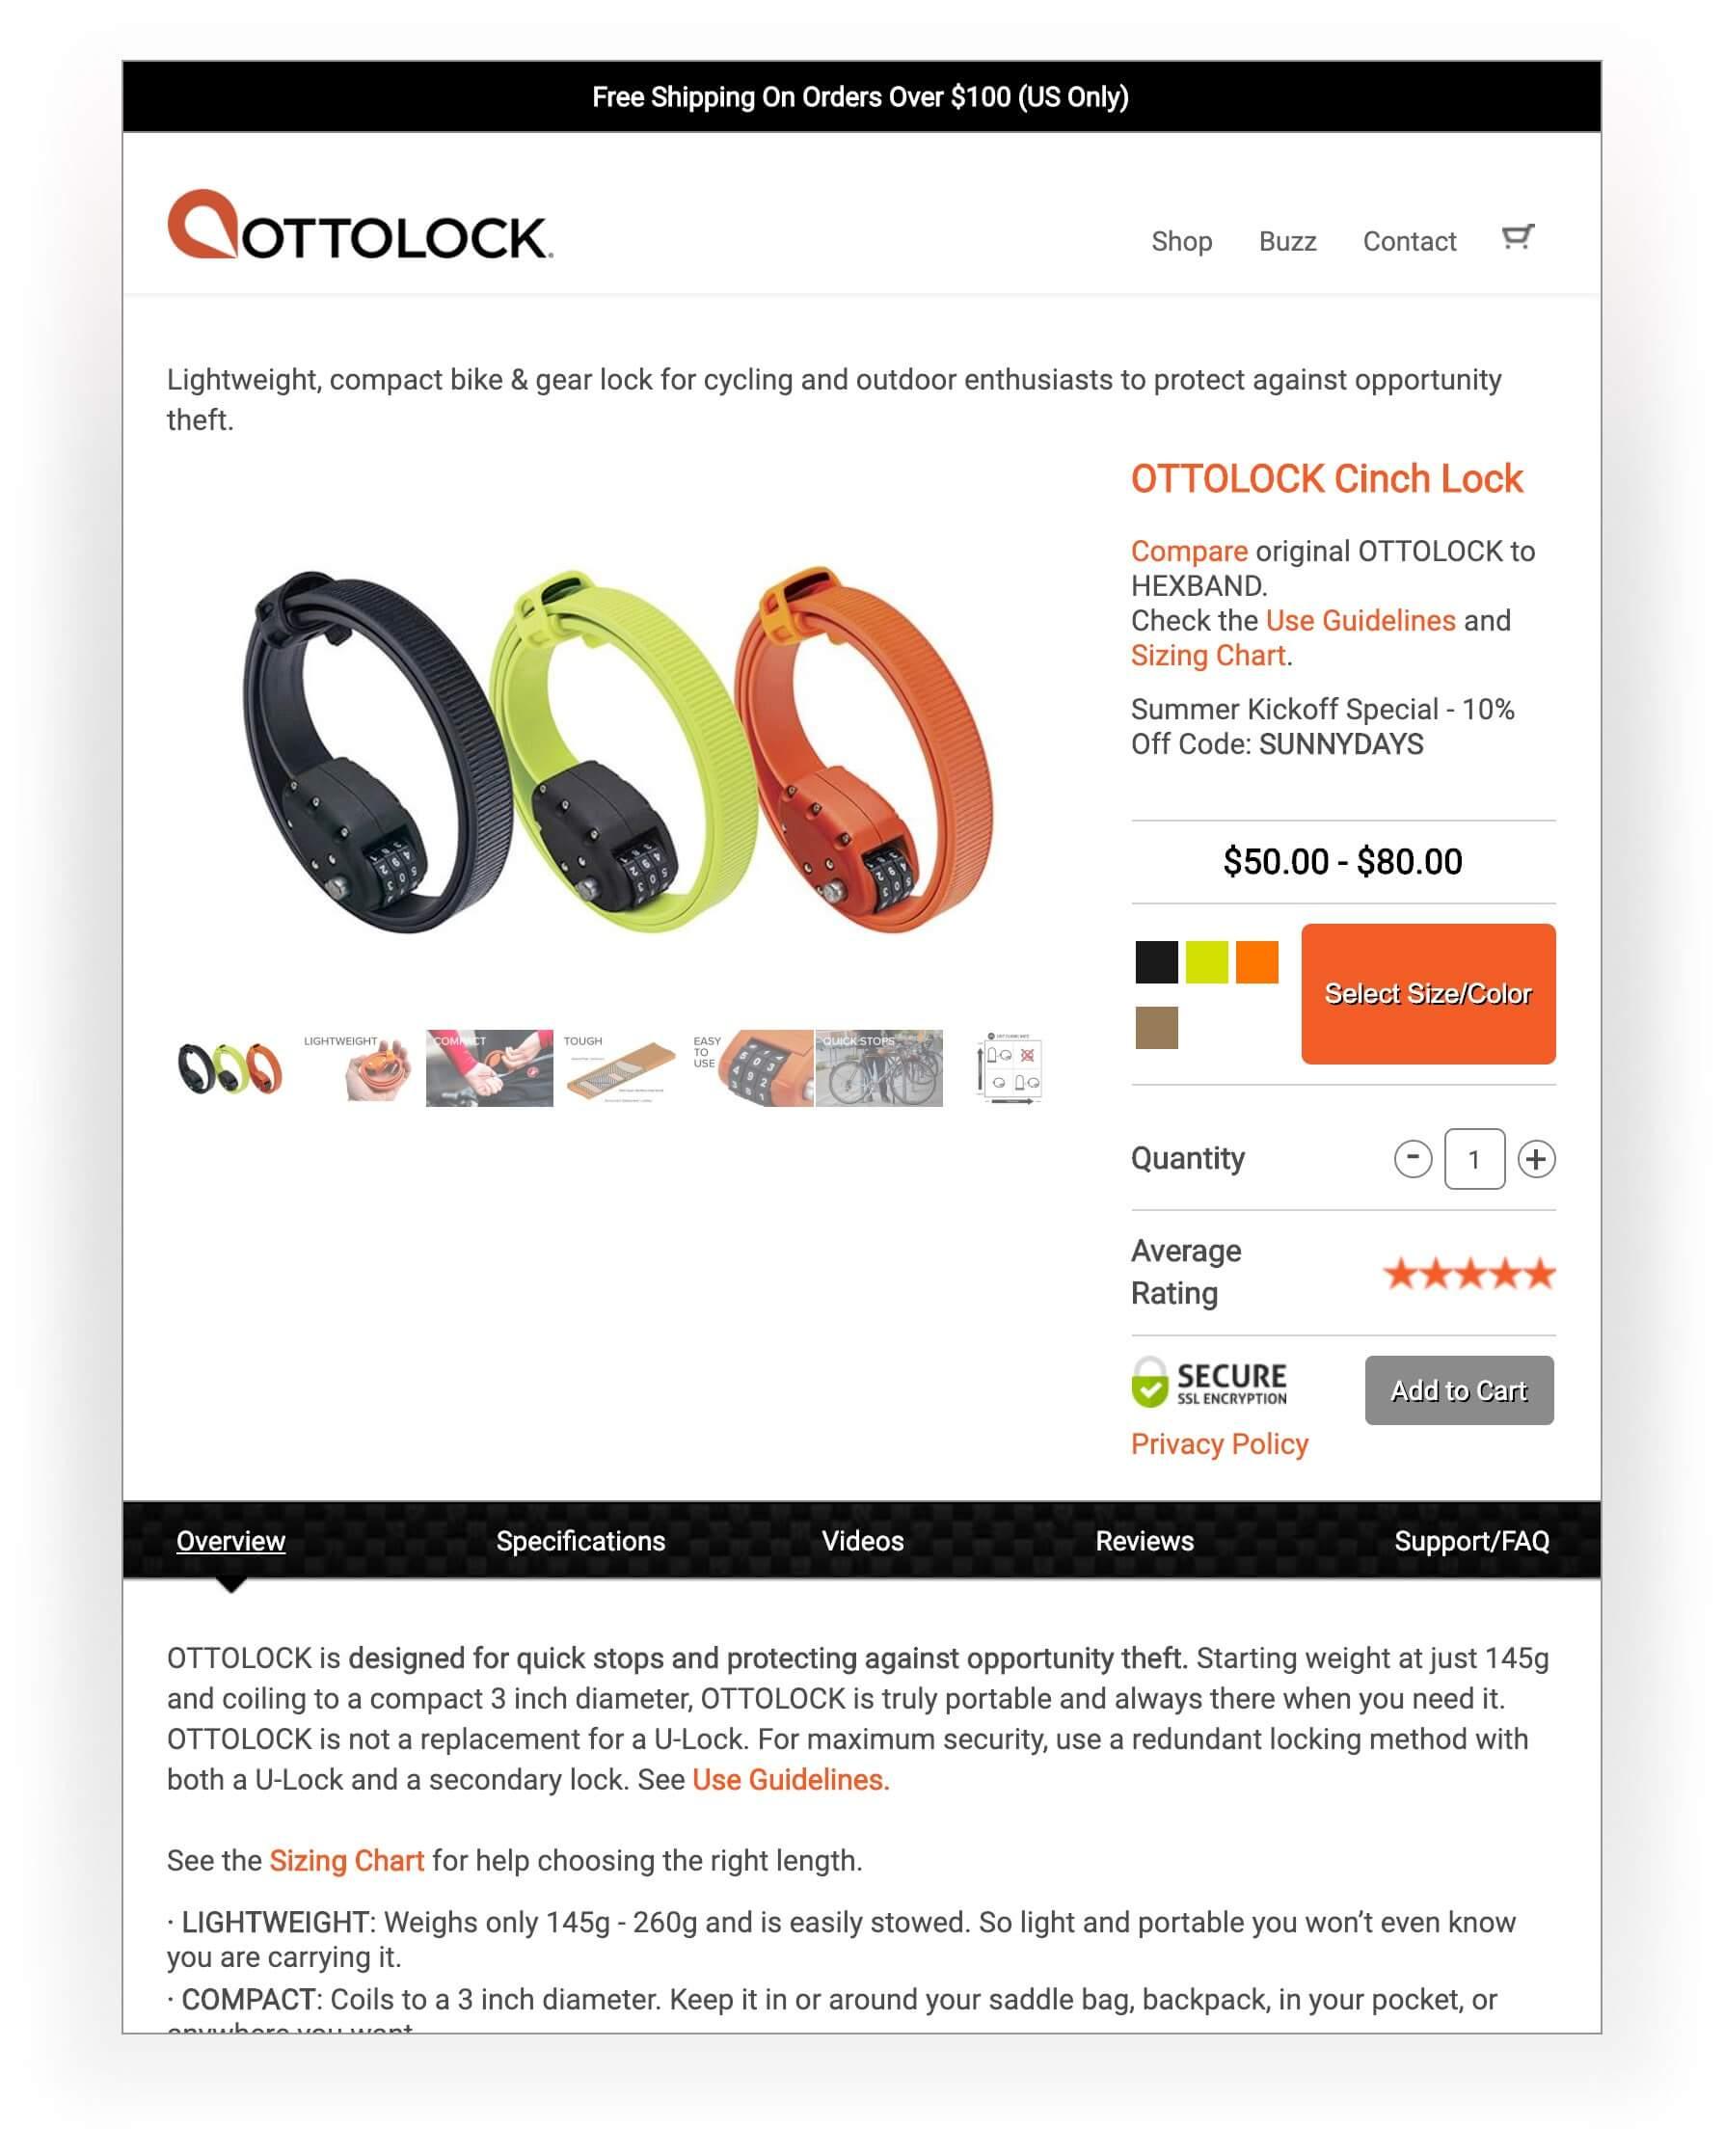 An image showing the OTTOLock website